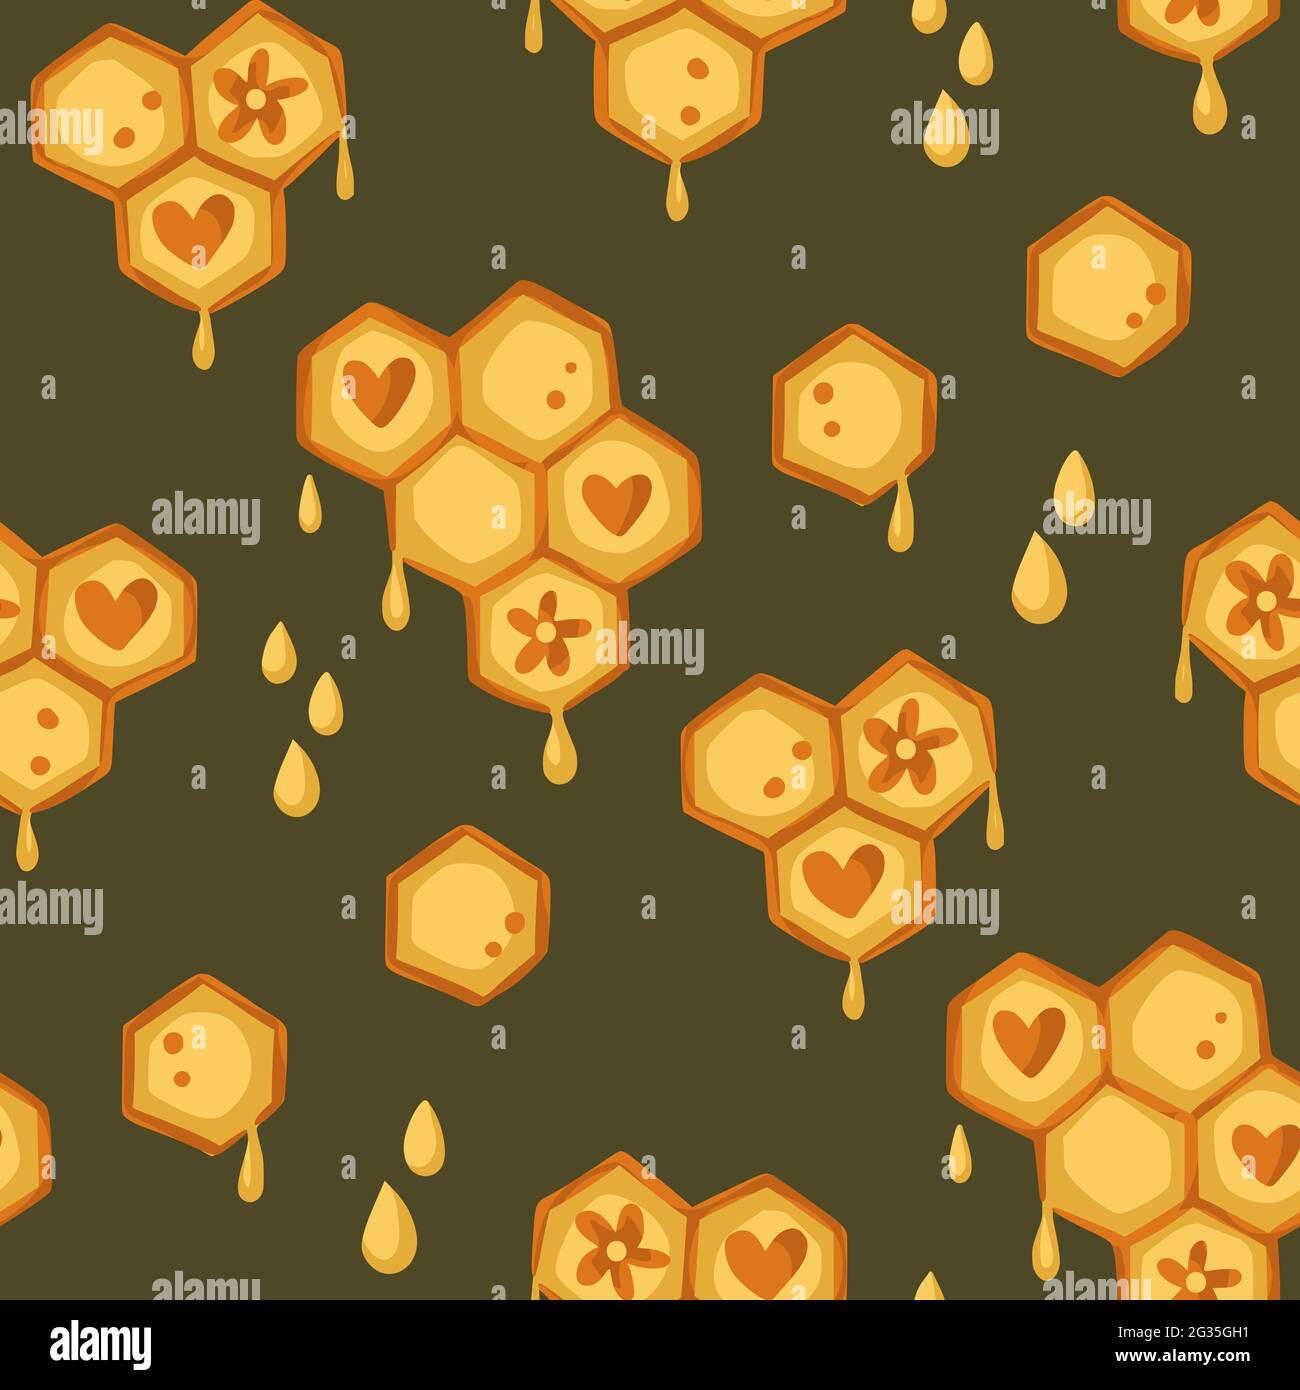 Beehive cartoon cute hexagon honeycomb seamless pattern background. Nature summer bee vector textured art with heart decoration ornaments. Stock Vector